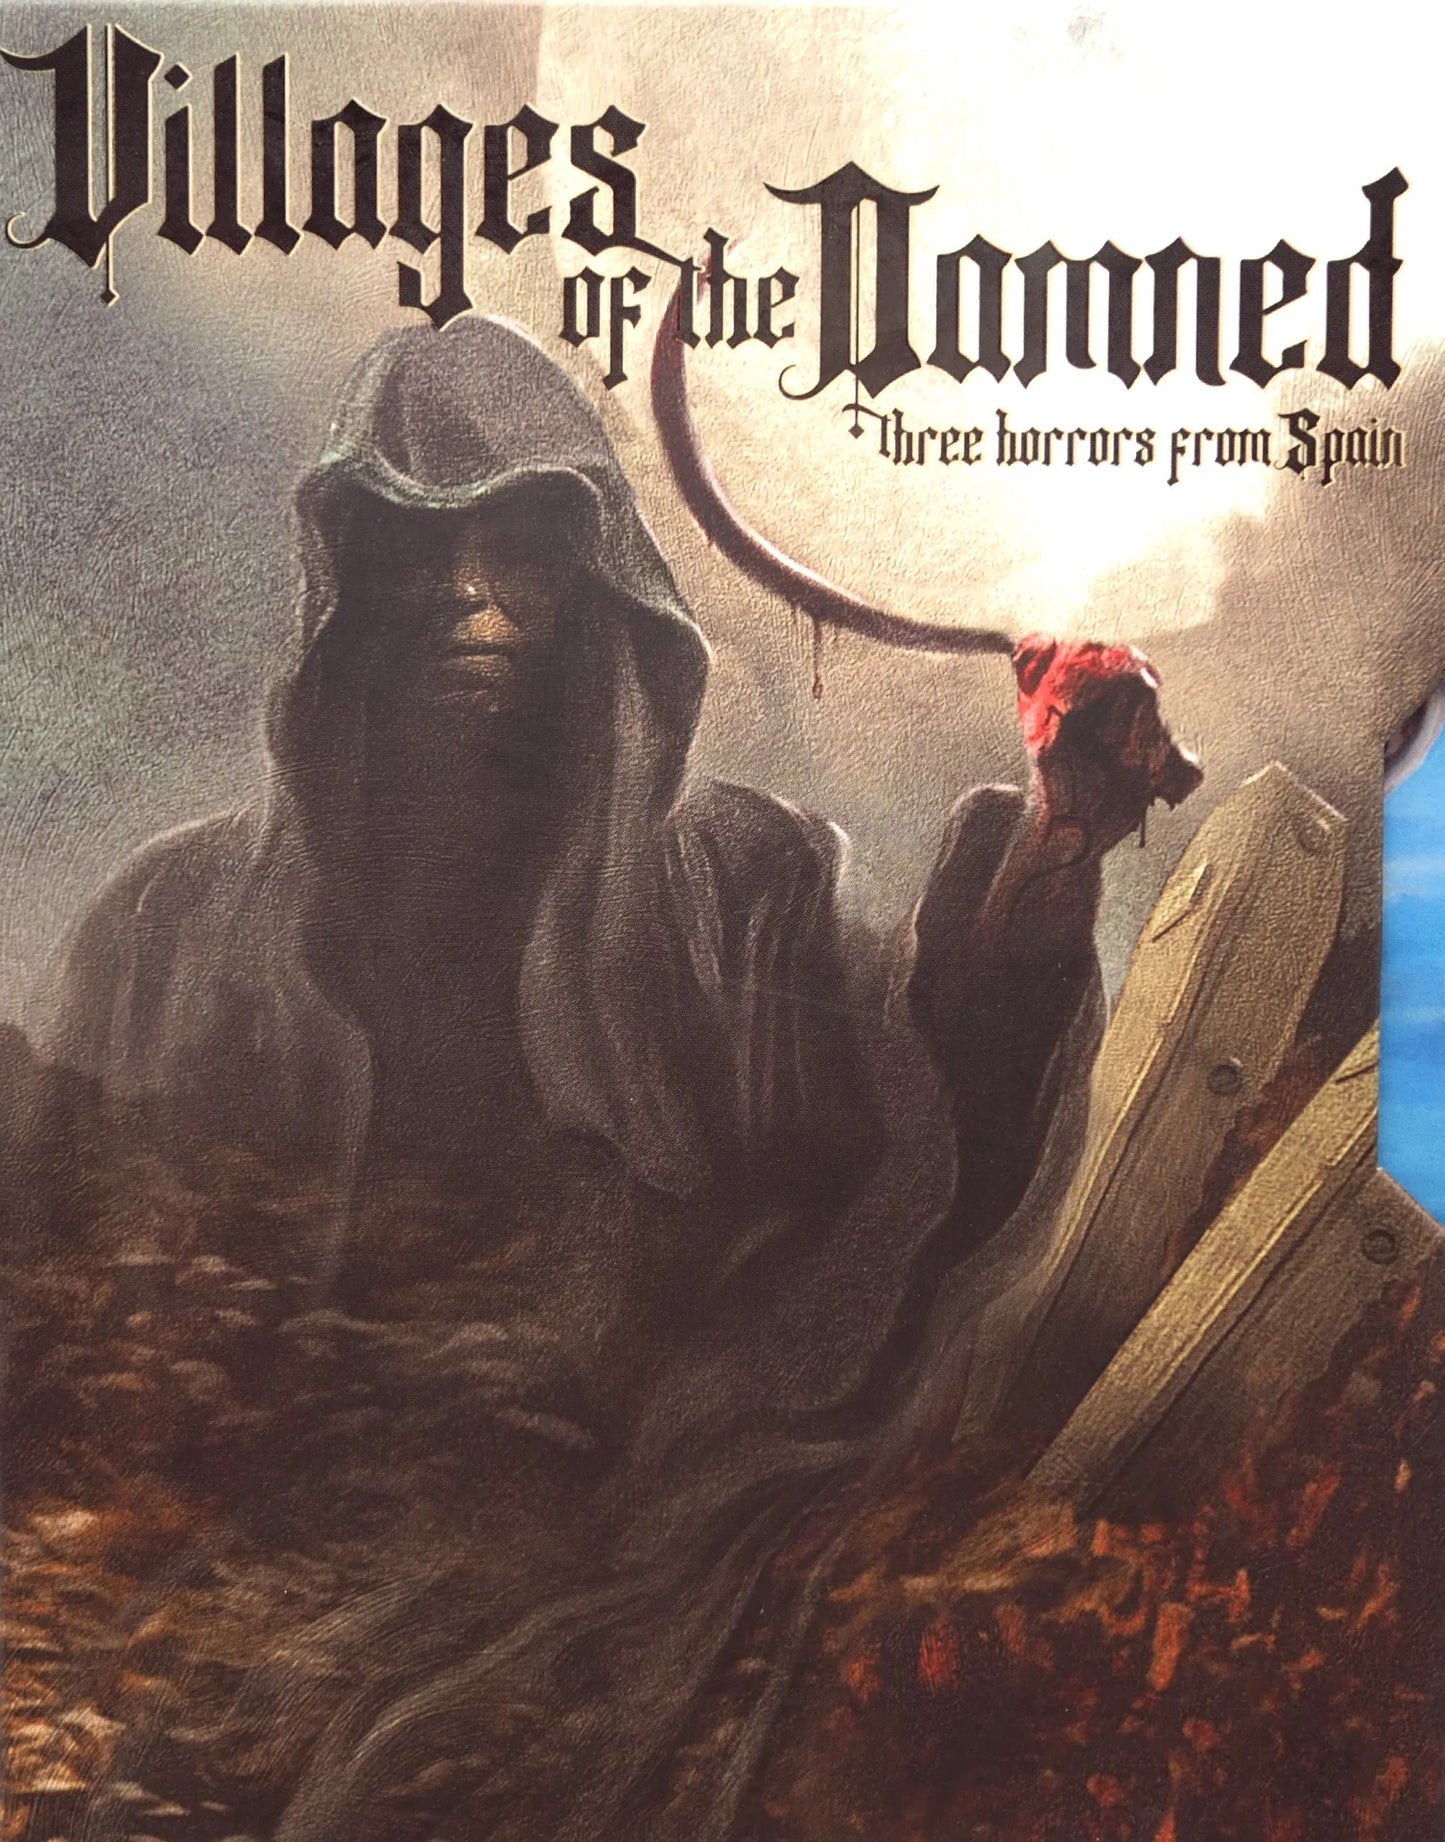 Villages of the Damned: Three Horrors From Spain Limited Edition Vinegar Syndrome Blu-Ray Box Set [NEW] [SLIPCOVER]